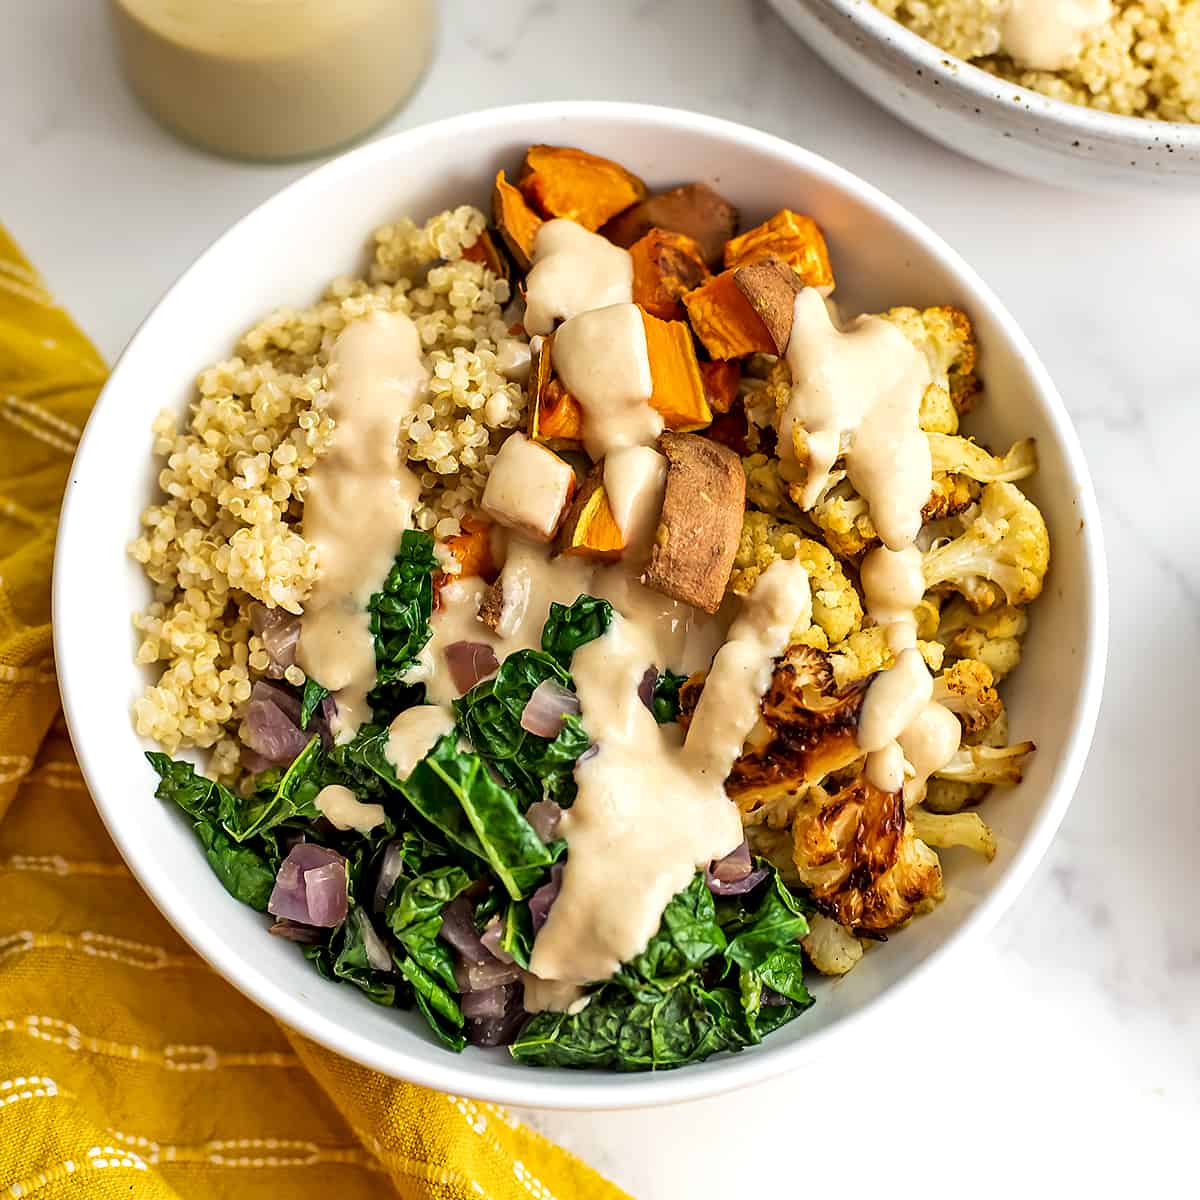 Kale sweet potato quinoa bowl with maple tahini dressing drizzled over top.